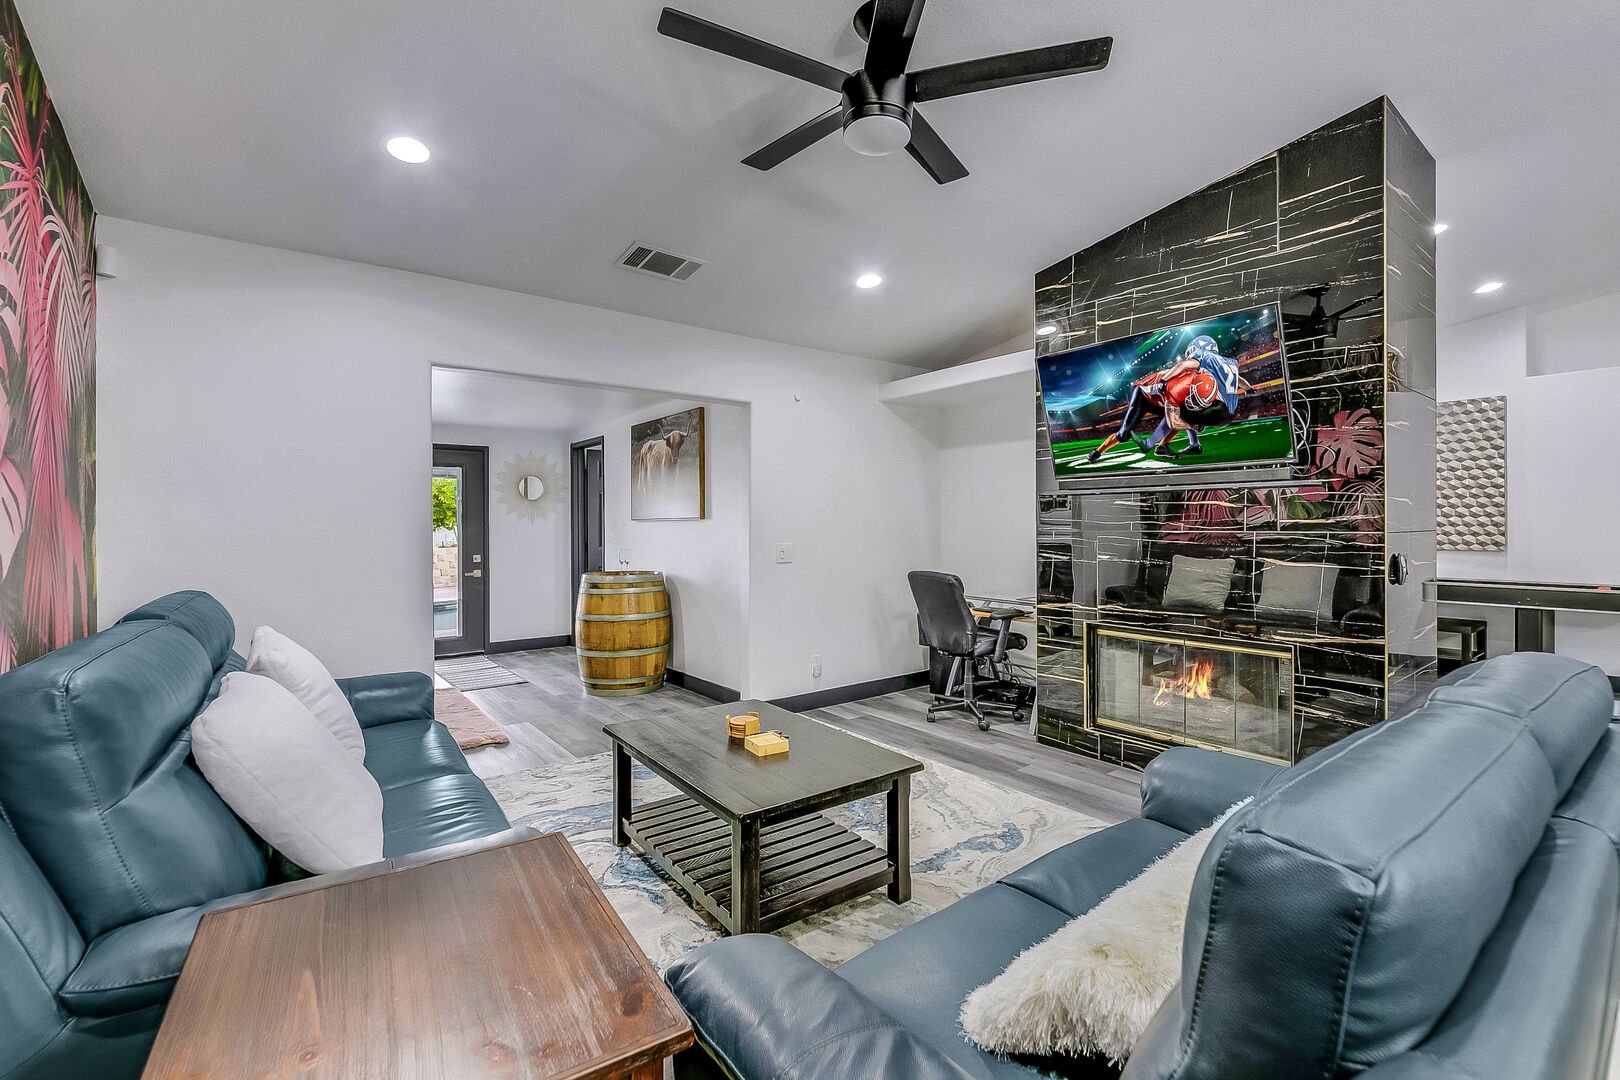 The main living space is the perfect spot to relax and watch the game on the Smart television.